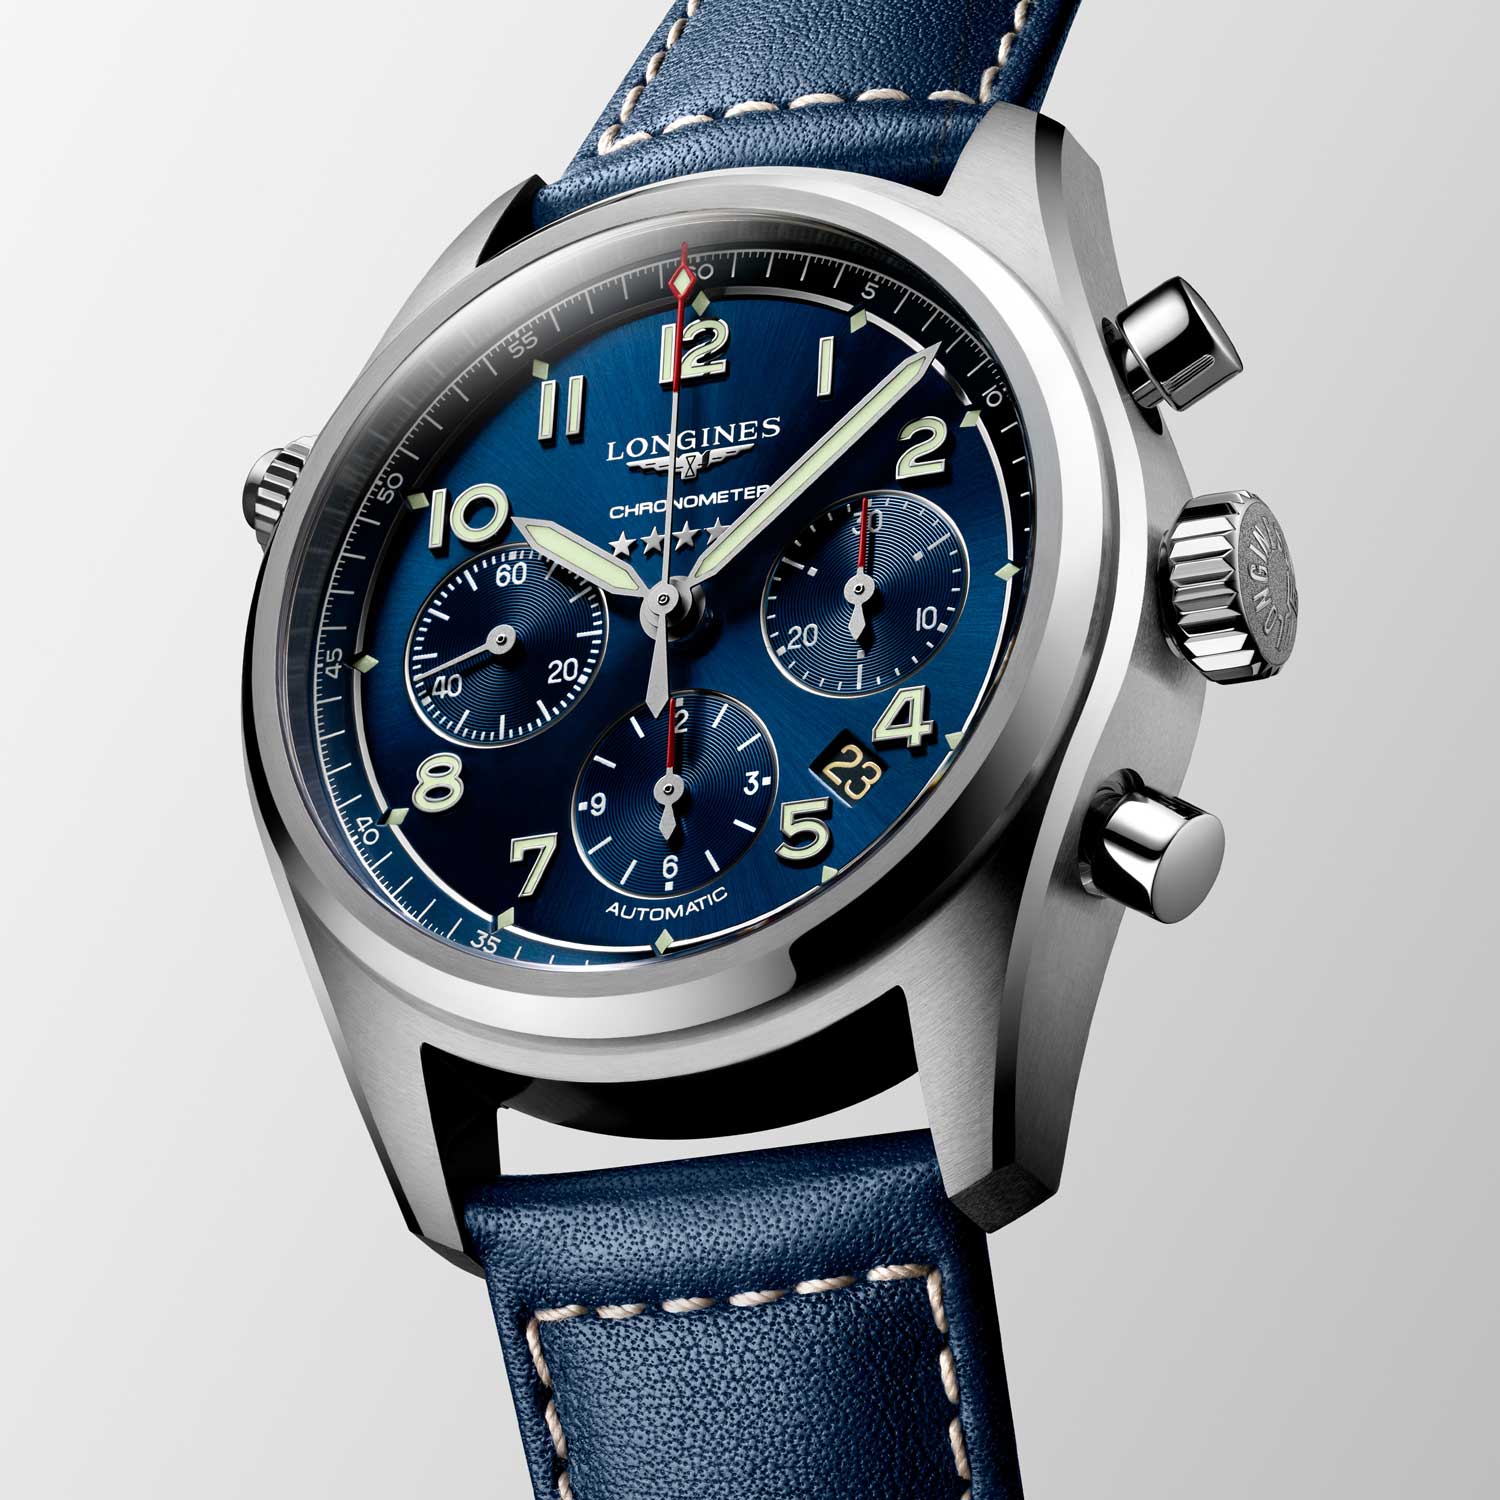 The chronograph addition to the Spirit collection is a 42mm satin and polished stainless steel timepiece; houses a COSC-certified column-wheel chronograph movement (L688.4) with silicon hairspring; a domed sapphire glass protects a sunray blue dial set with Arabic numerals and silvered sandblasted hands coated with Super-LumiNova®; the finishing touch to this exceptional watch is the blue leather strap that complements the case and dial